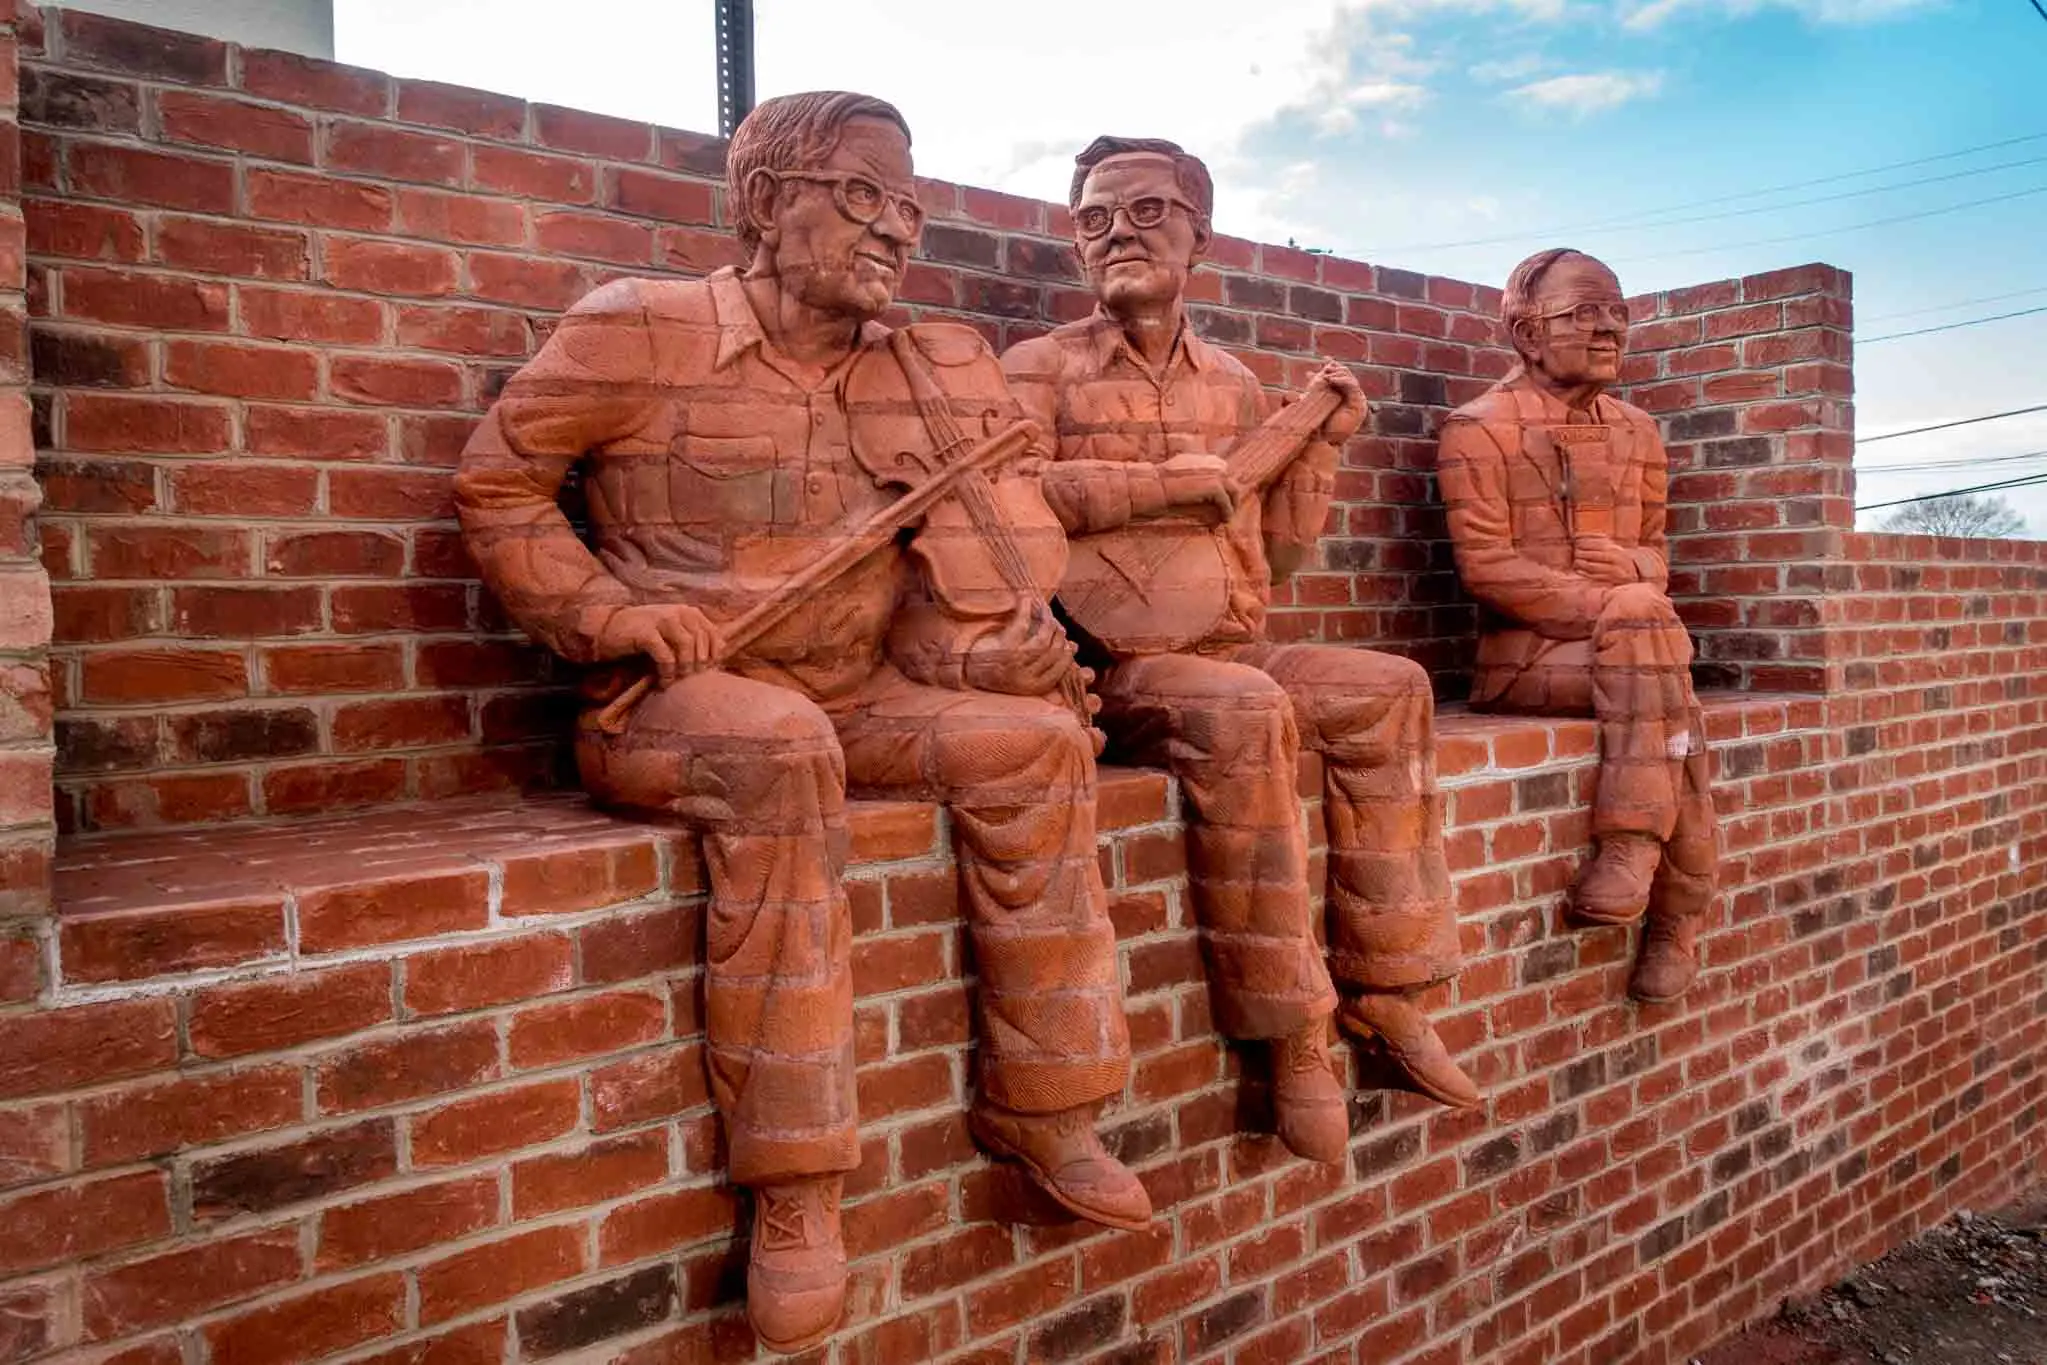 Brick sculptures of musicians sitting on a wall